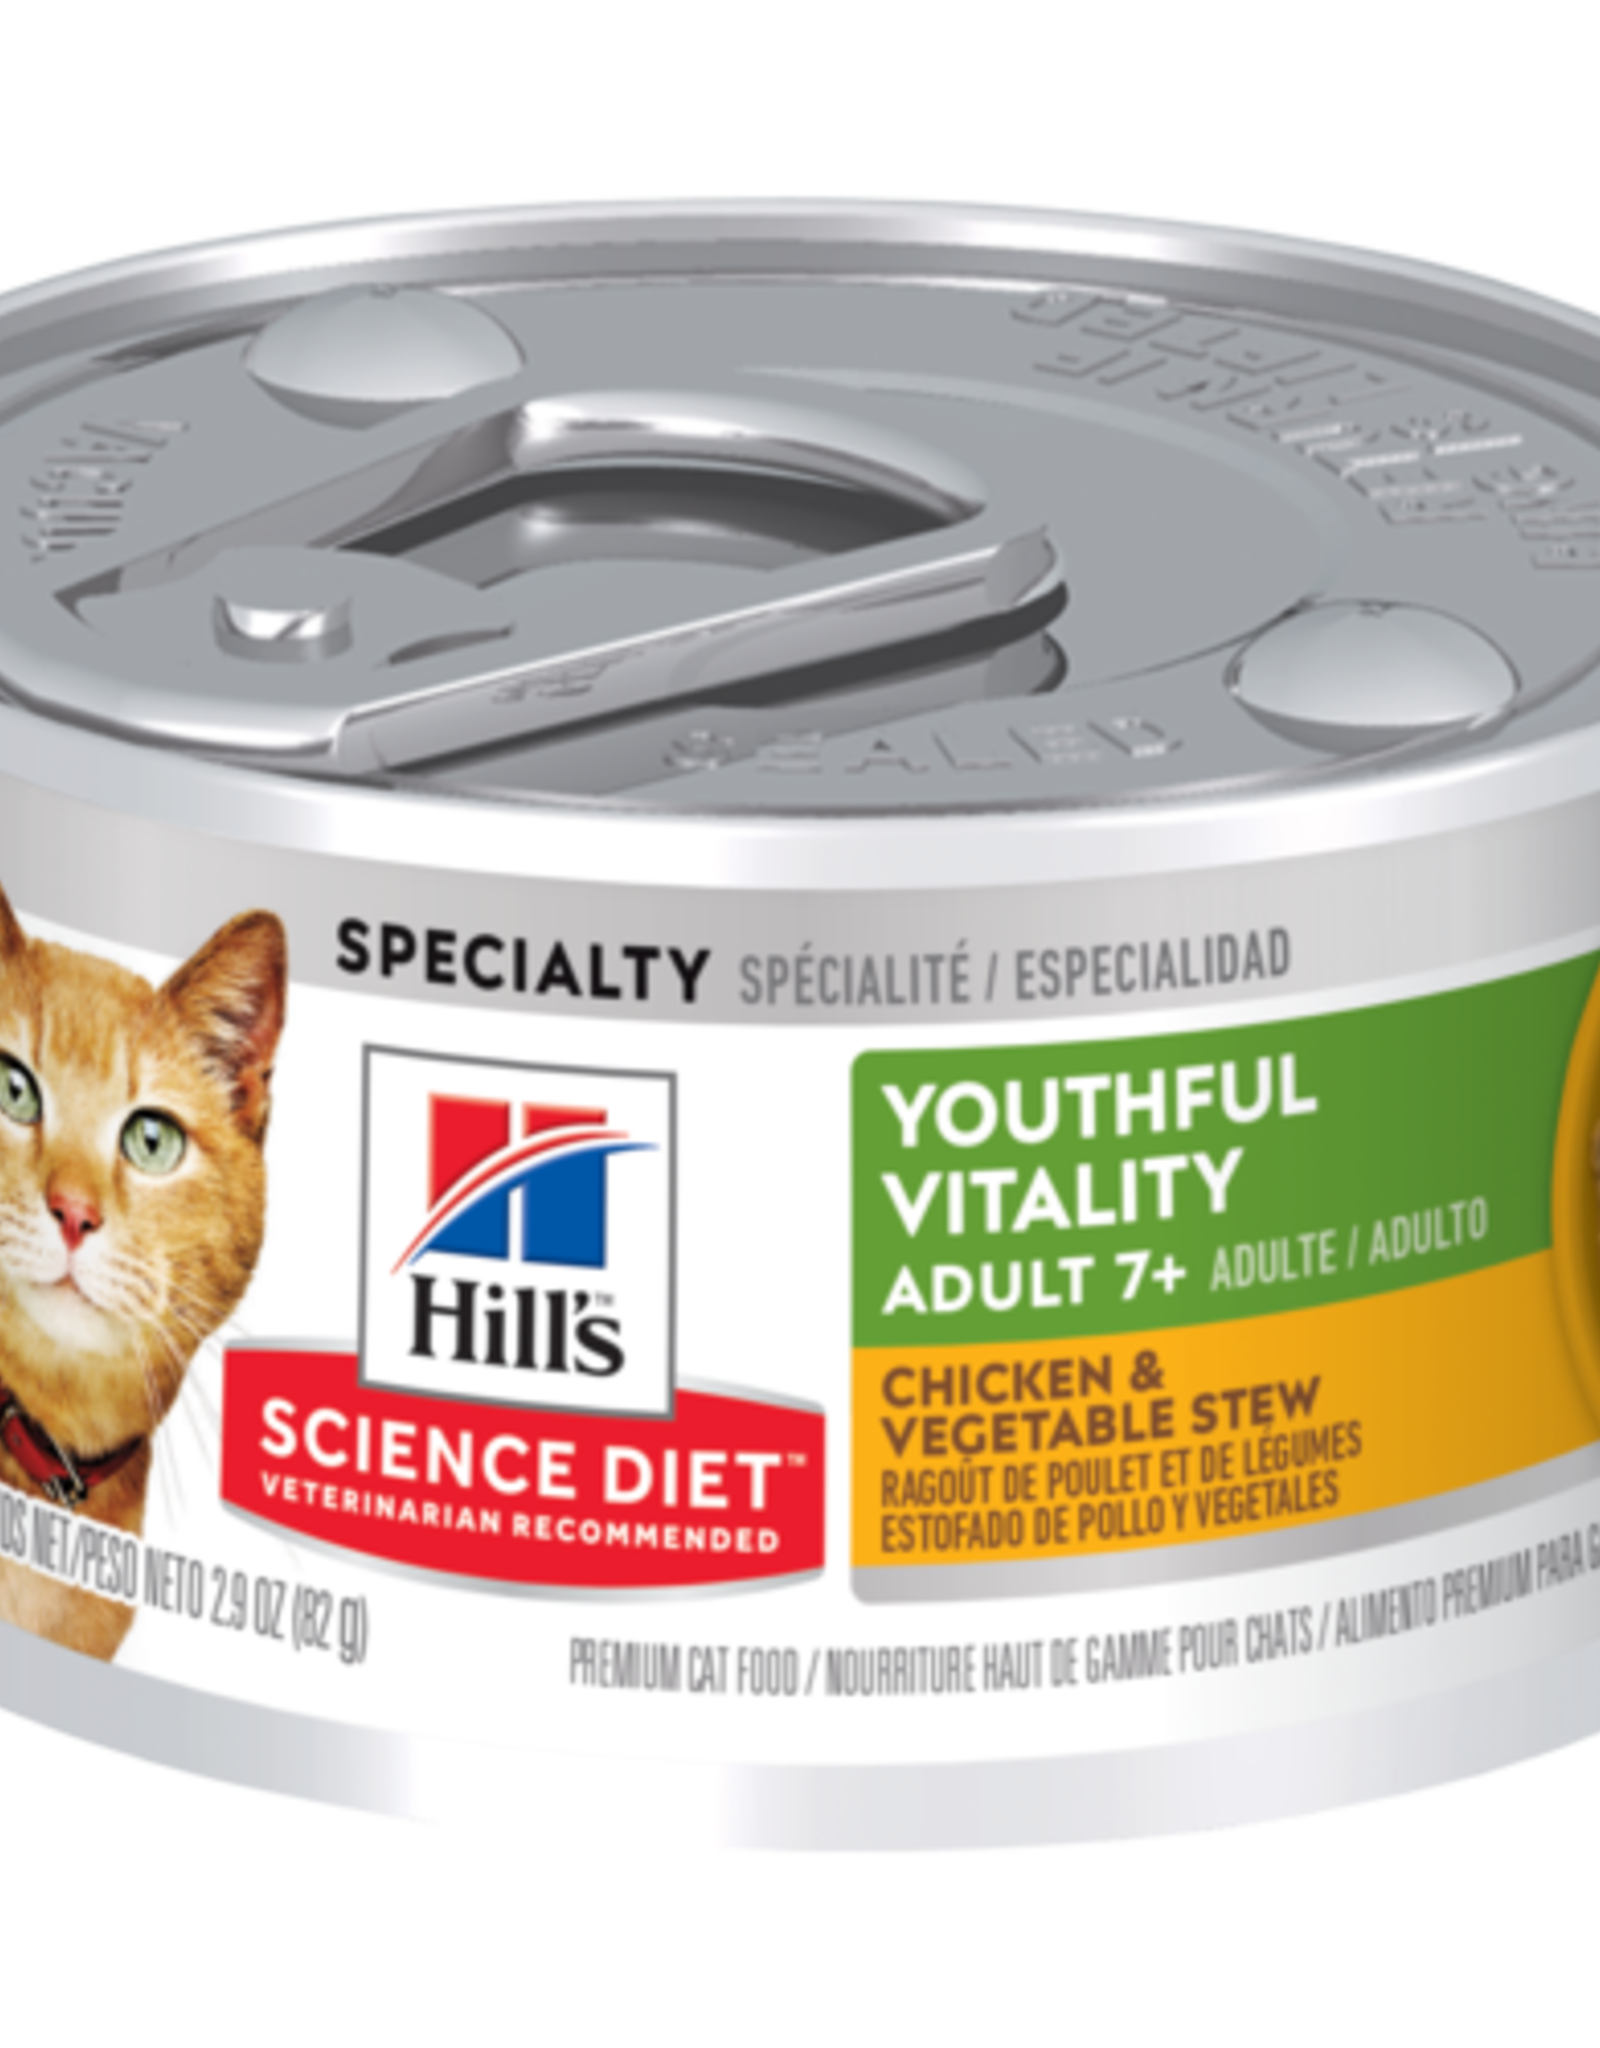 SCIENCE DIET HILL'S SCIENCE DIET CAT ADULT 7+ YOUTHFUL VITALITY CHICKEN & VEGETABLE STEW 2.9OZ CASE OF 24